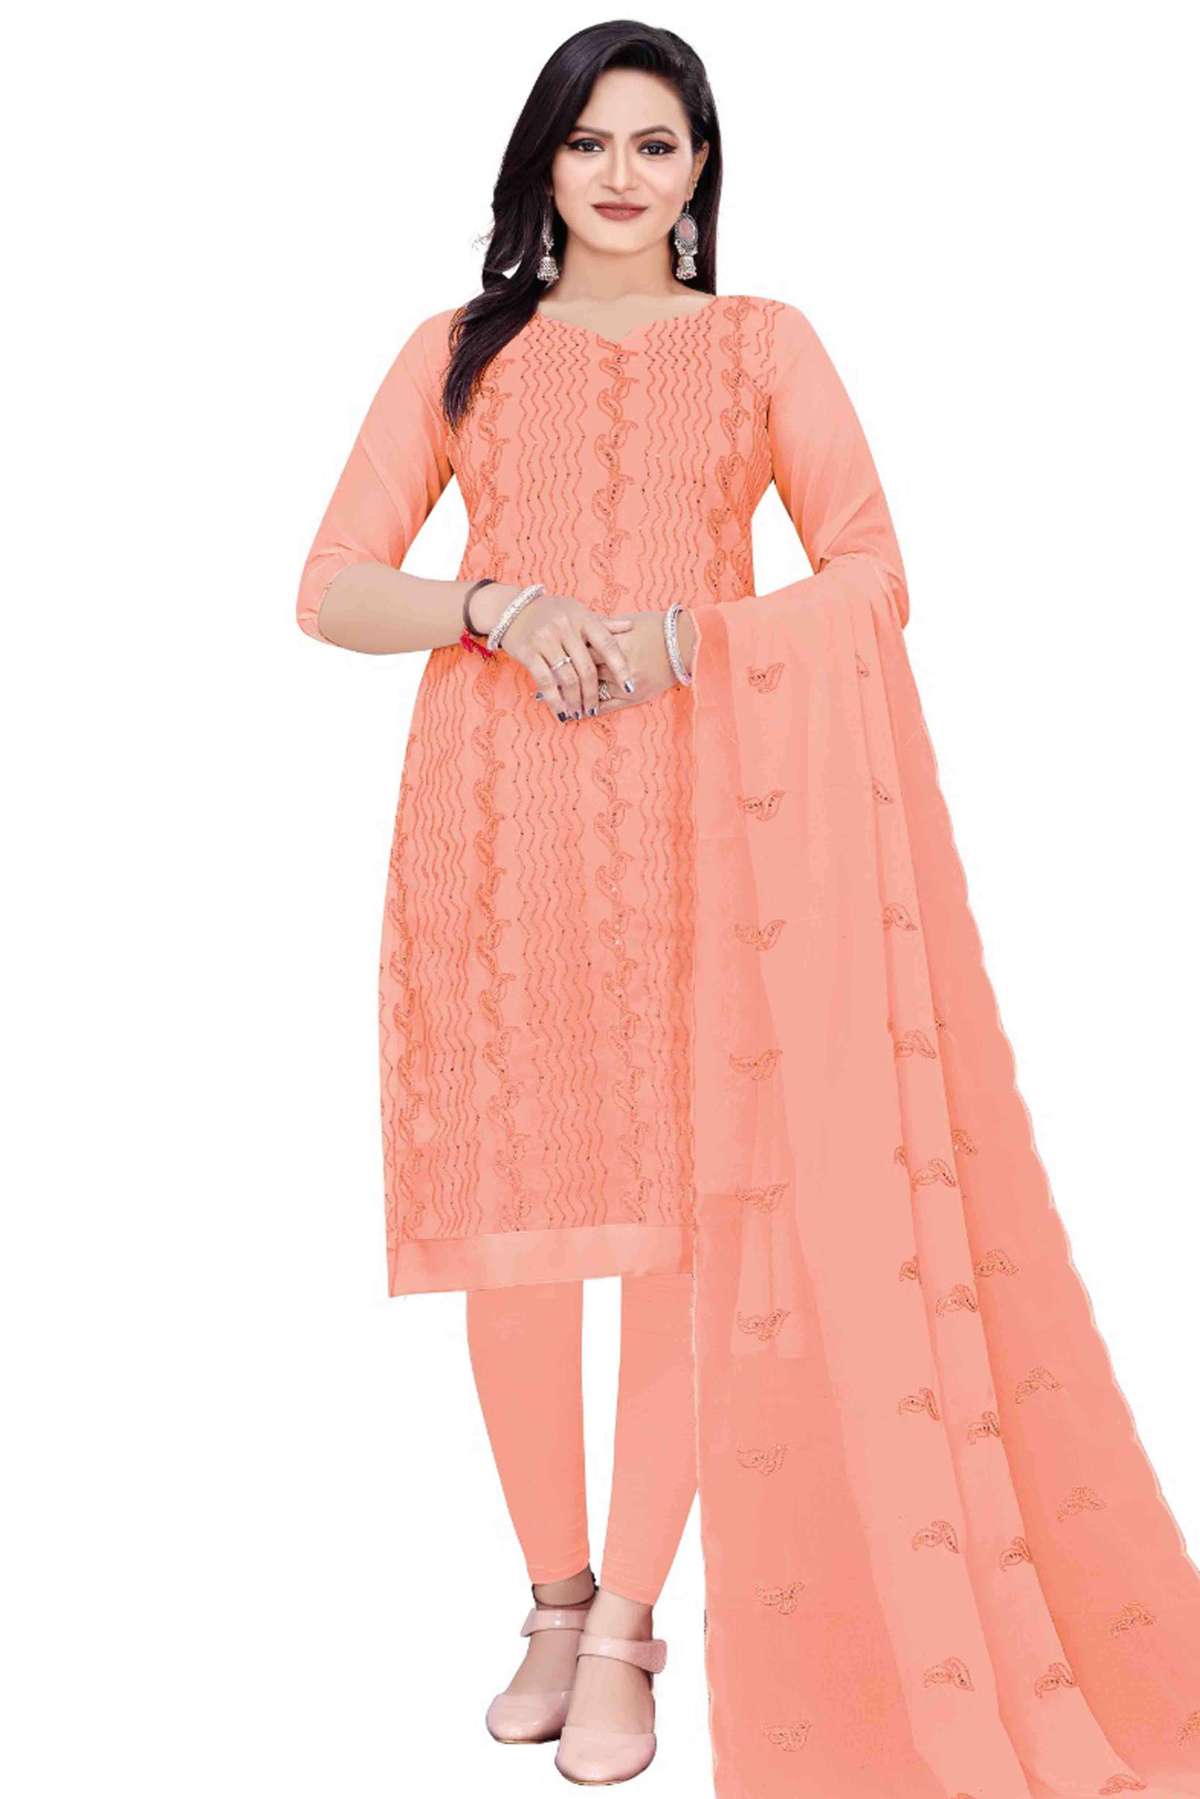 Unstitched Georgette Embroidery Churidar Suit In Peach Colour - US3234355